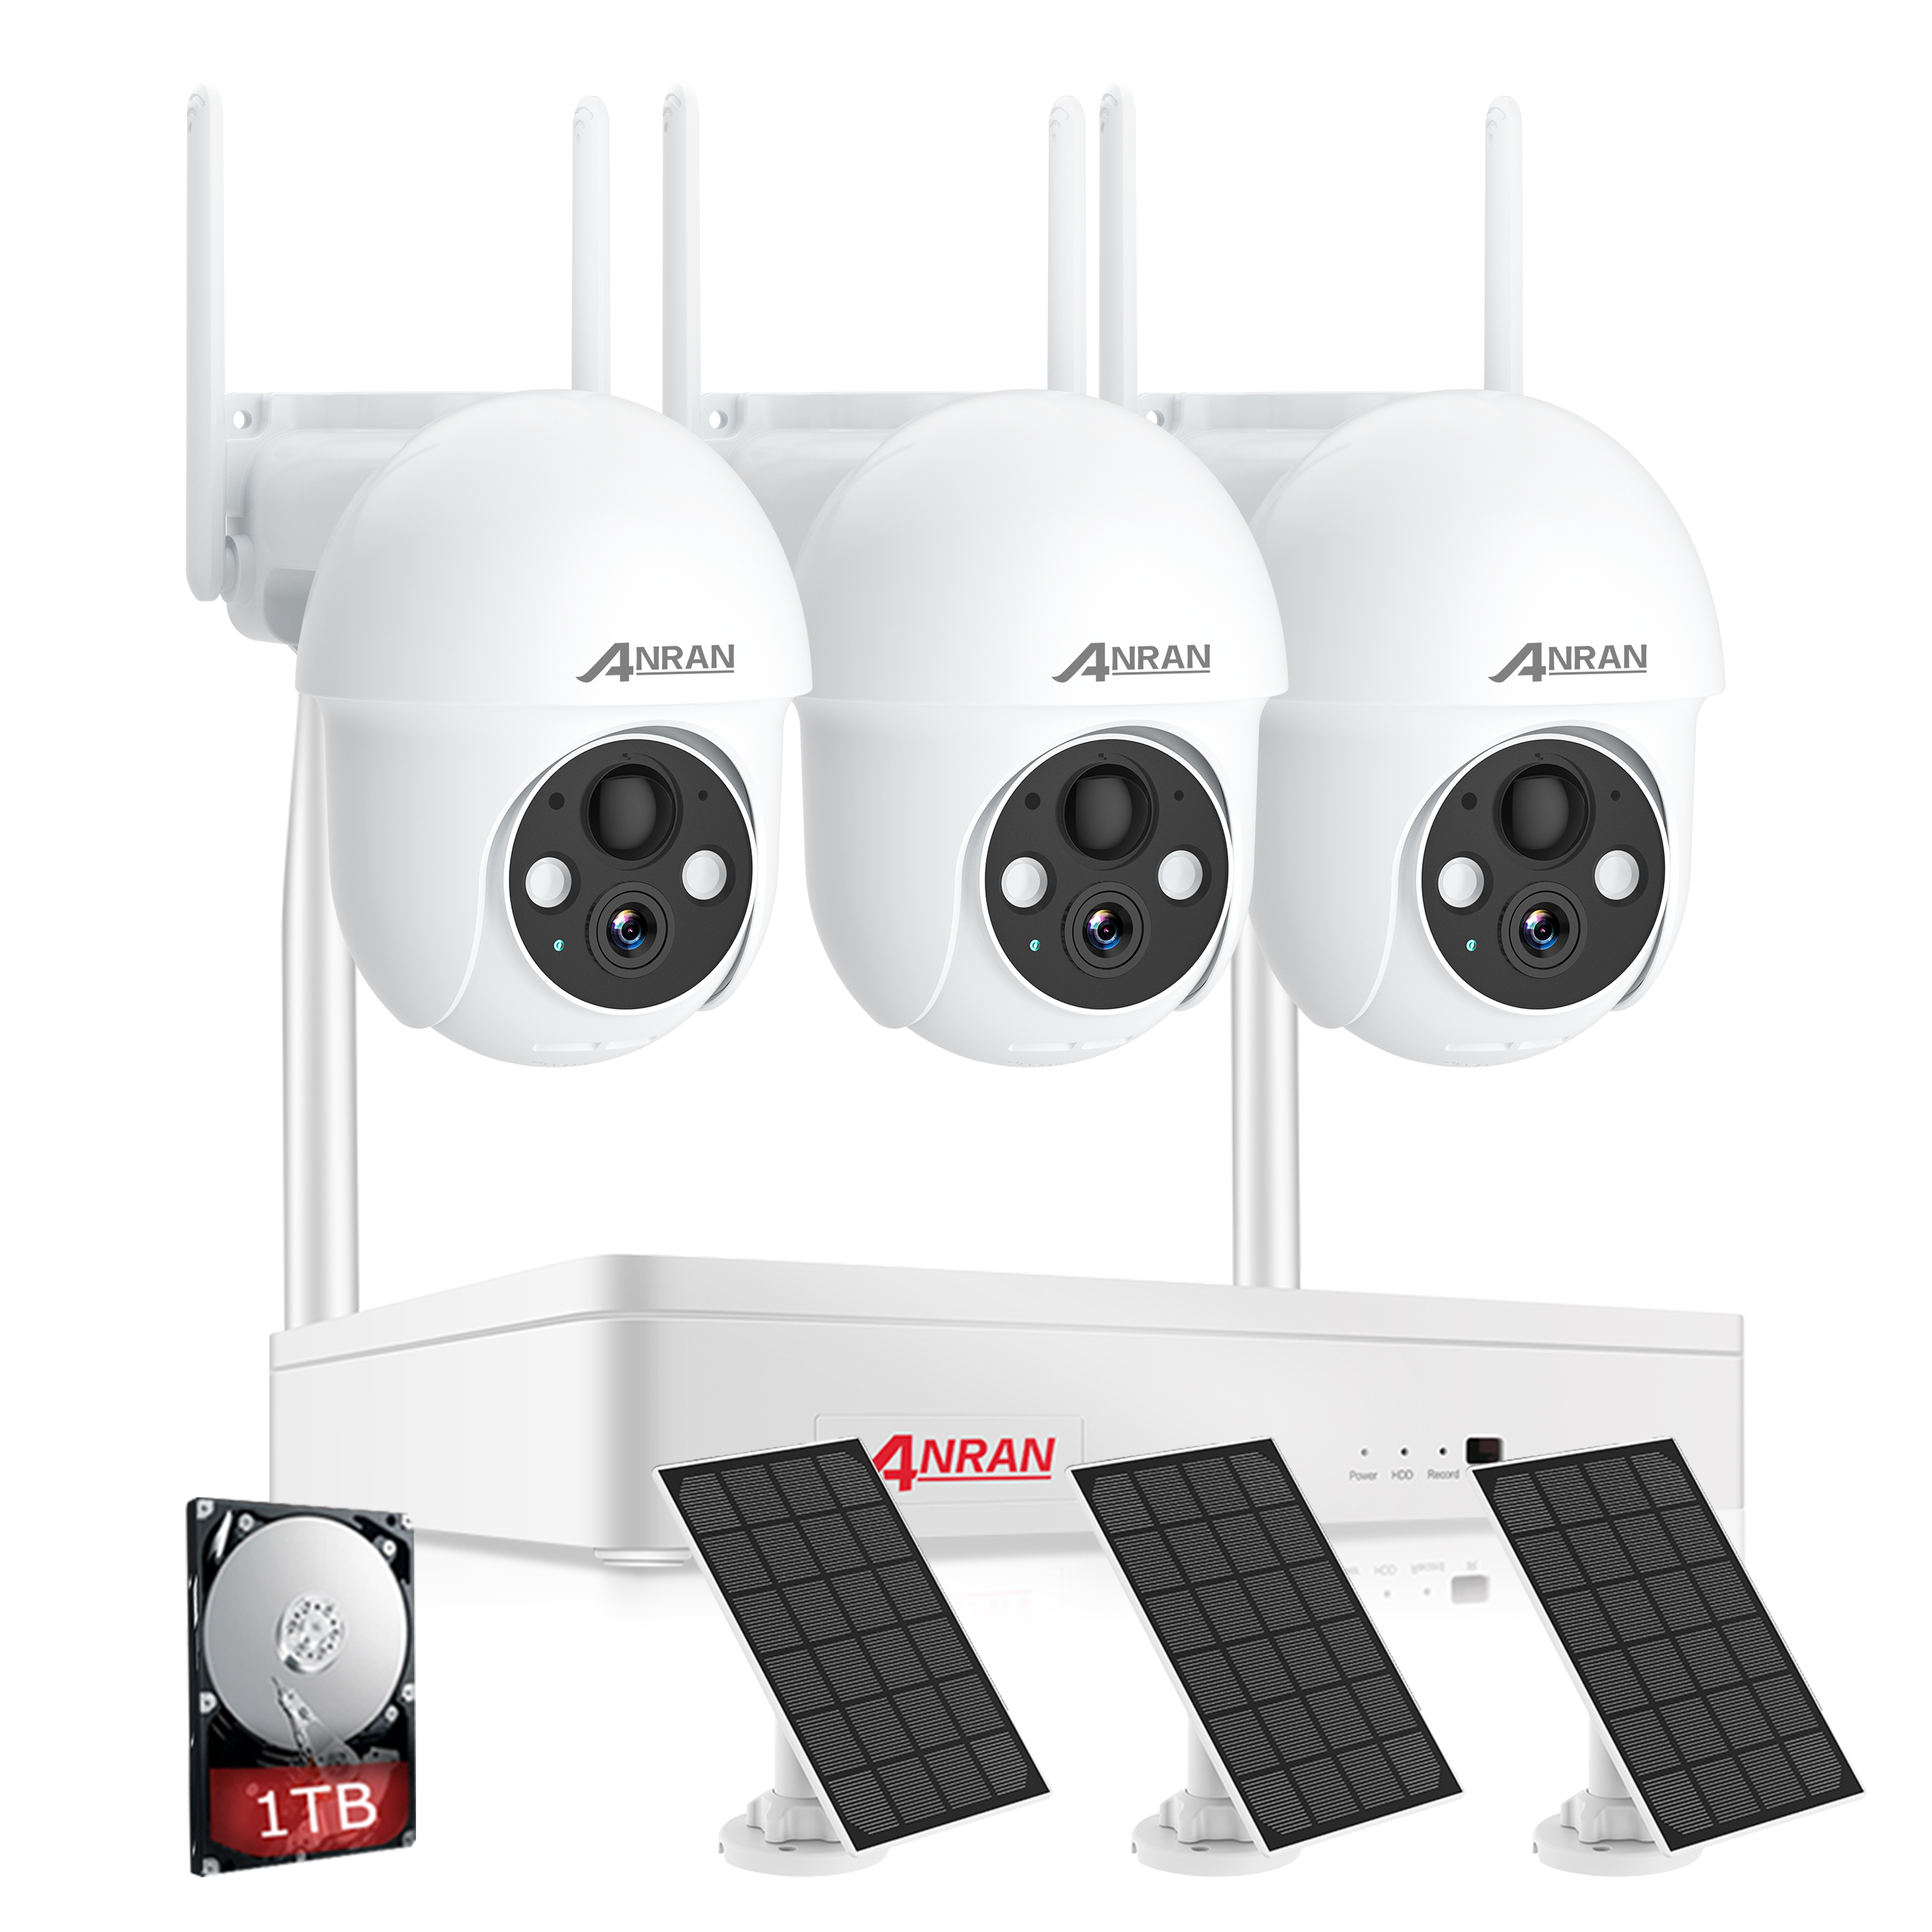 ANRAN CCTV Camera System Outdoor Home Security Solar Panels Battery WiFi 2K 2way Audio 